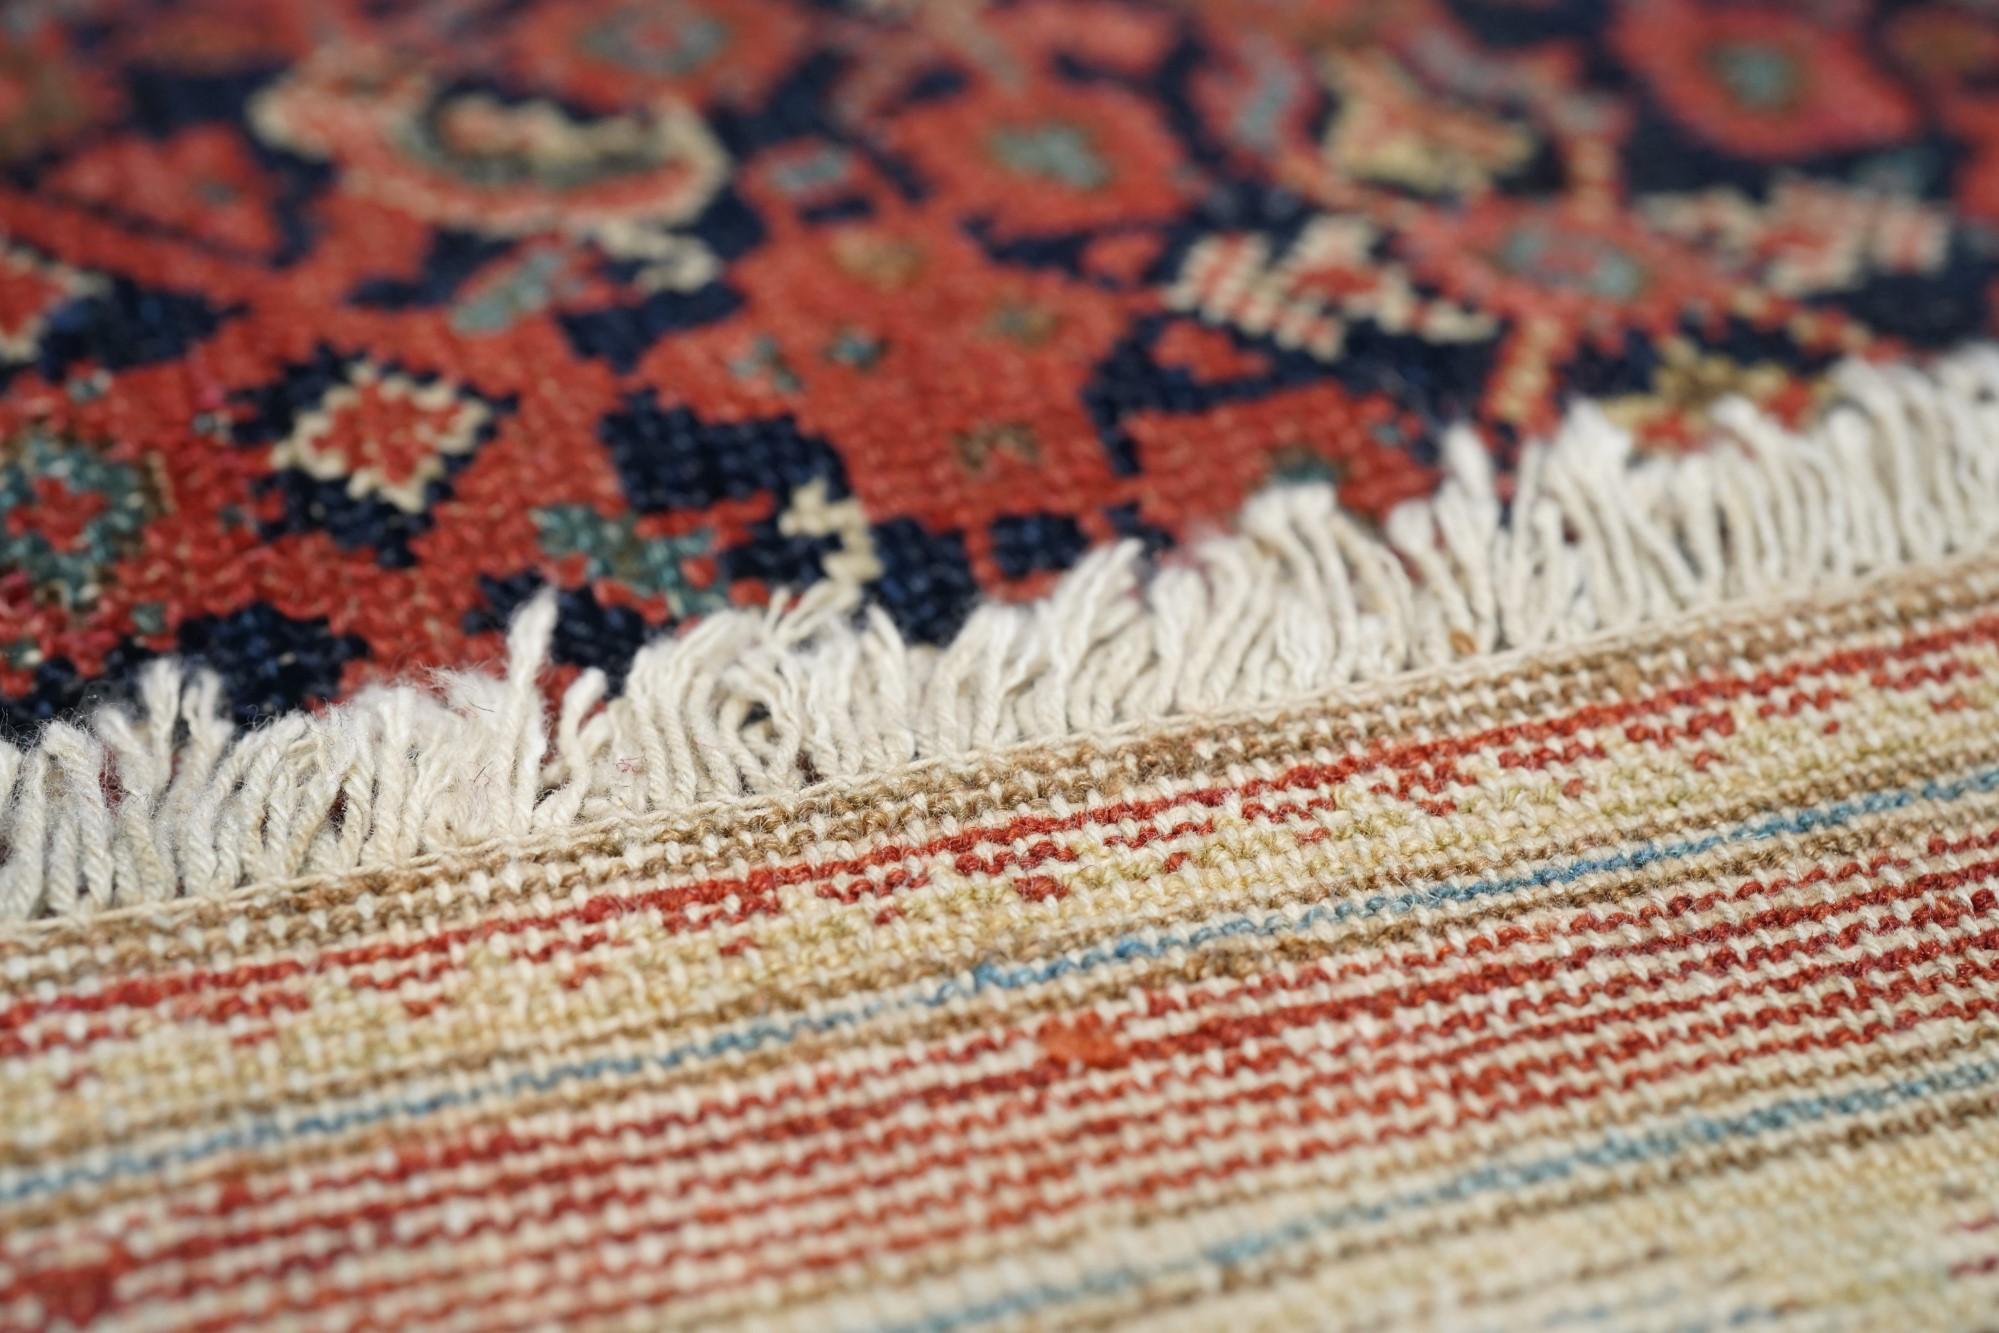 Antique Malayer Rug For Sale 6